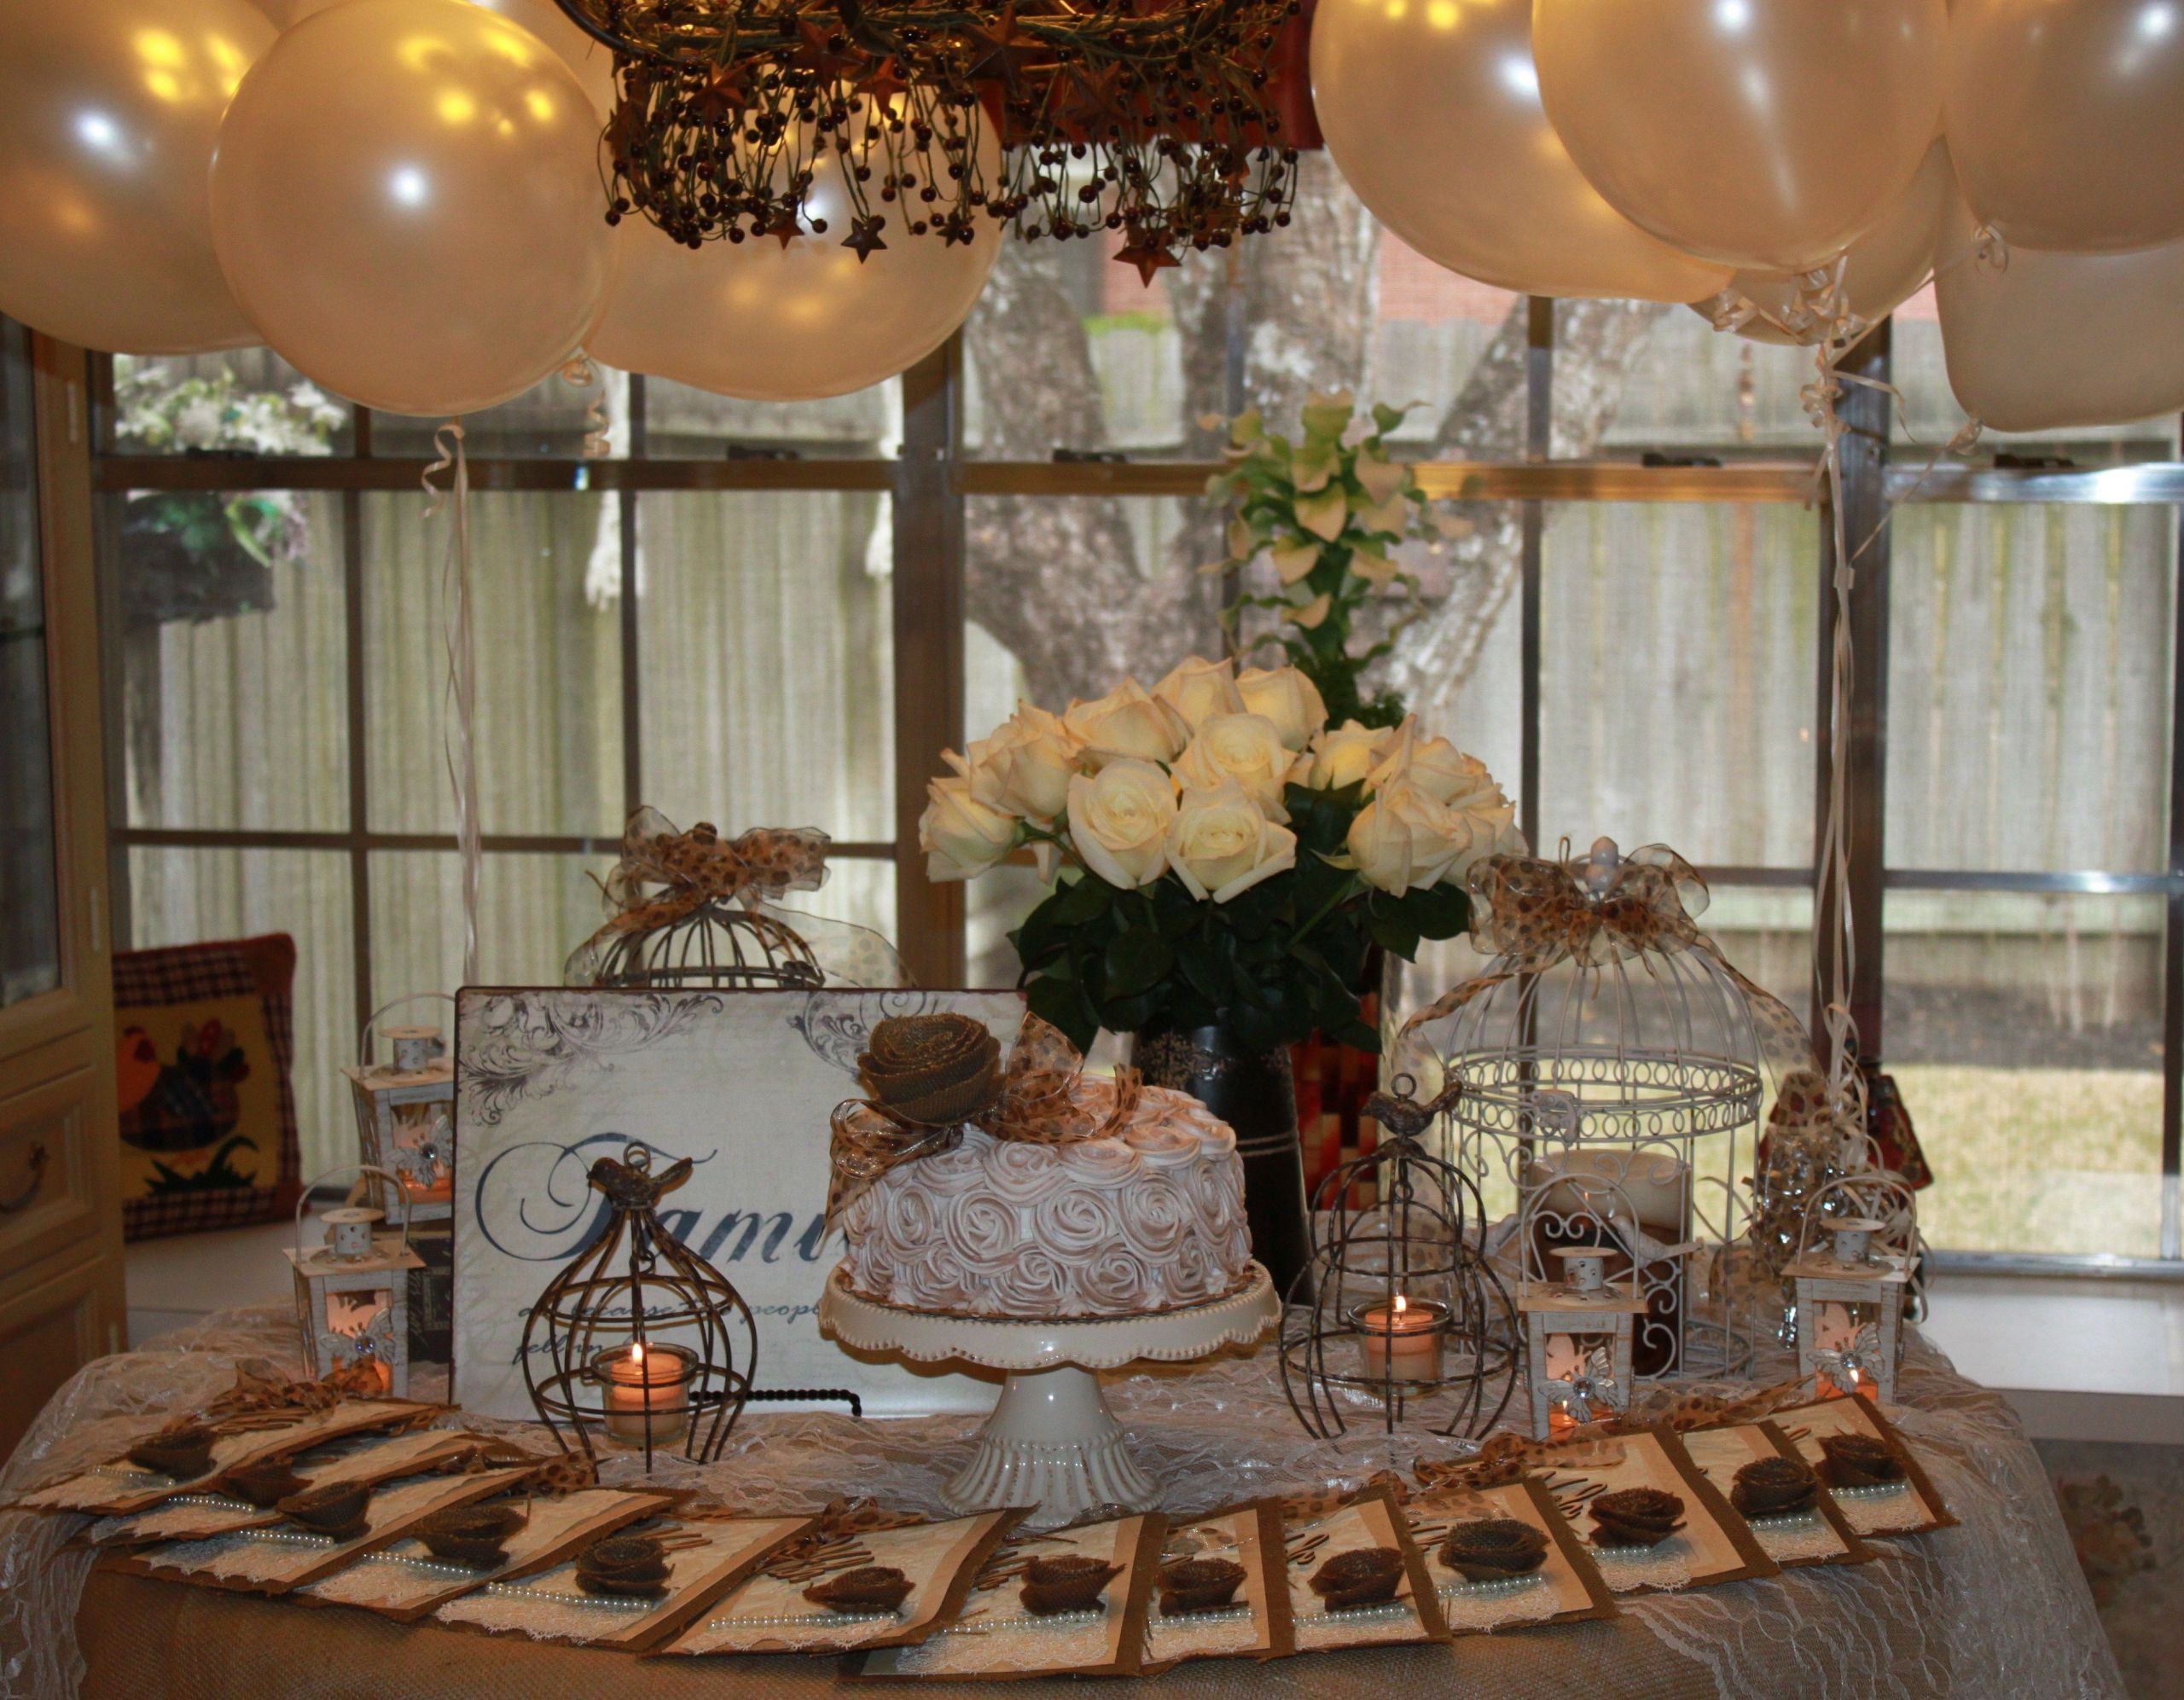 75th Birthday Party Ideas
 A vintage garden themed party for mom s 75th birthday